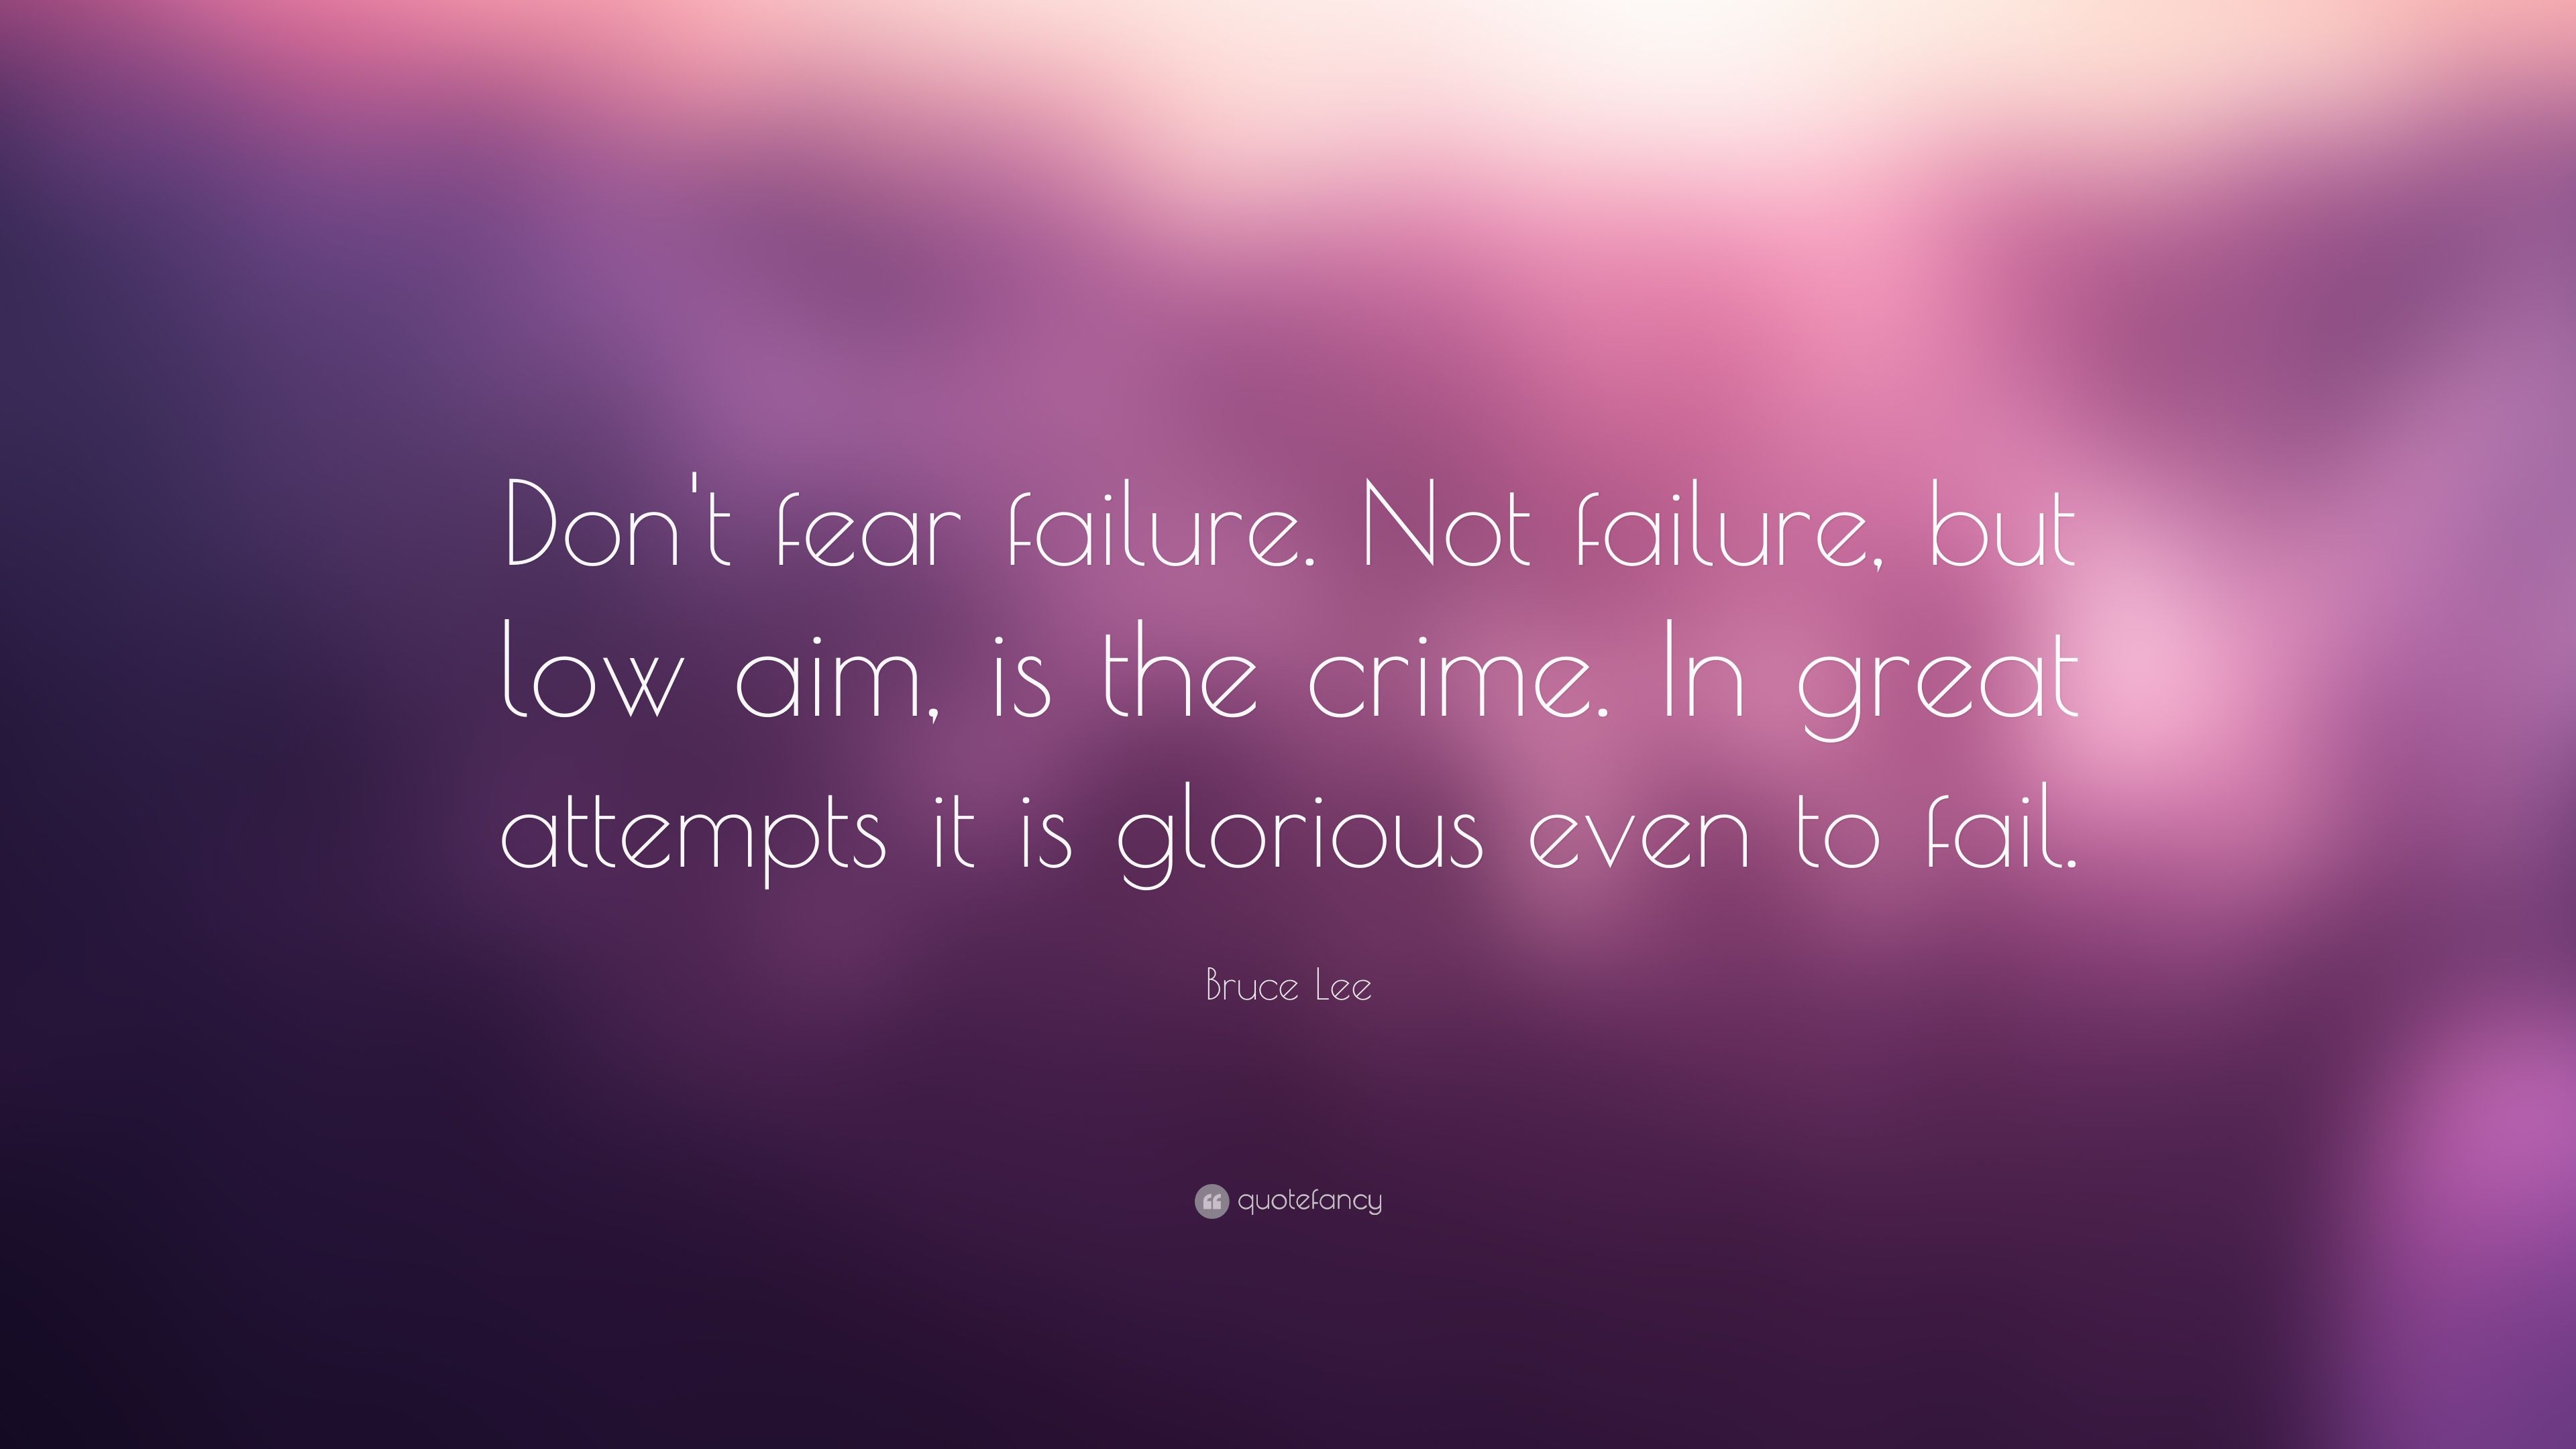 Bruce Lee Quote Dont fear failure. Not failure, but low aim, is